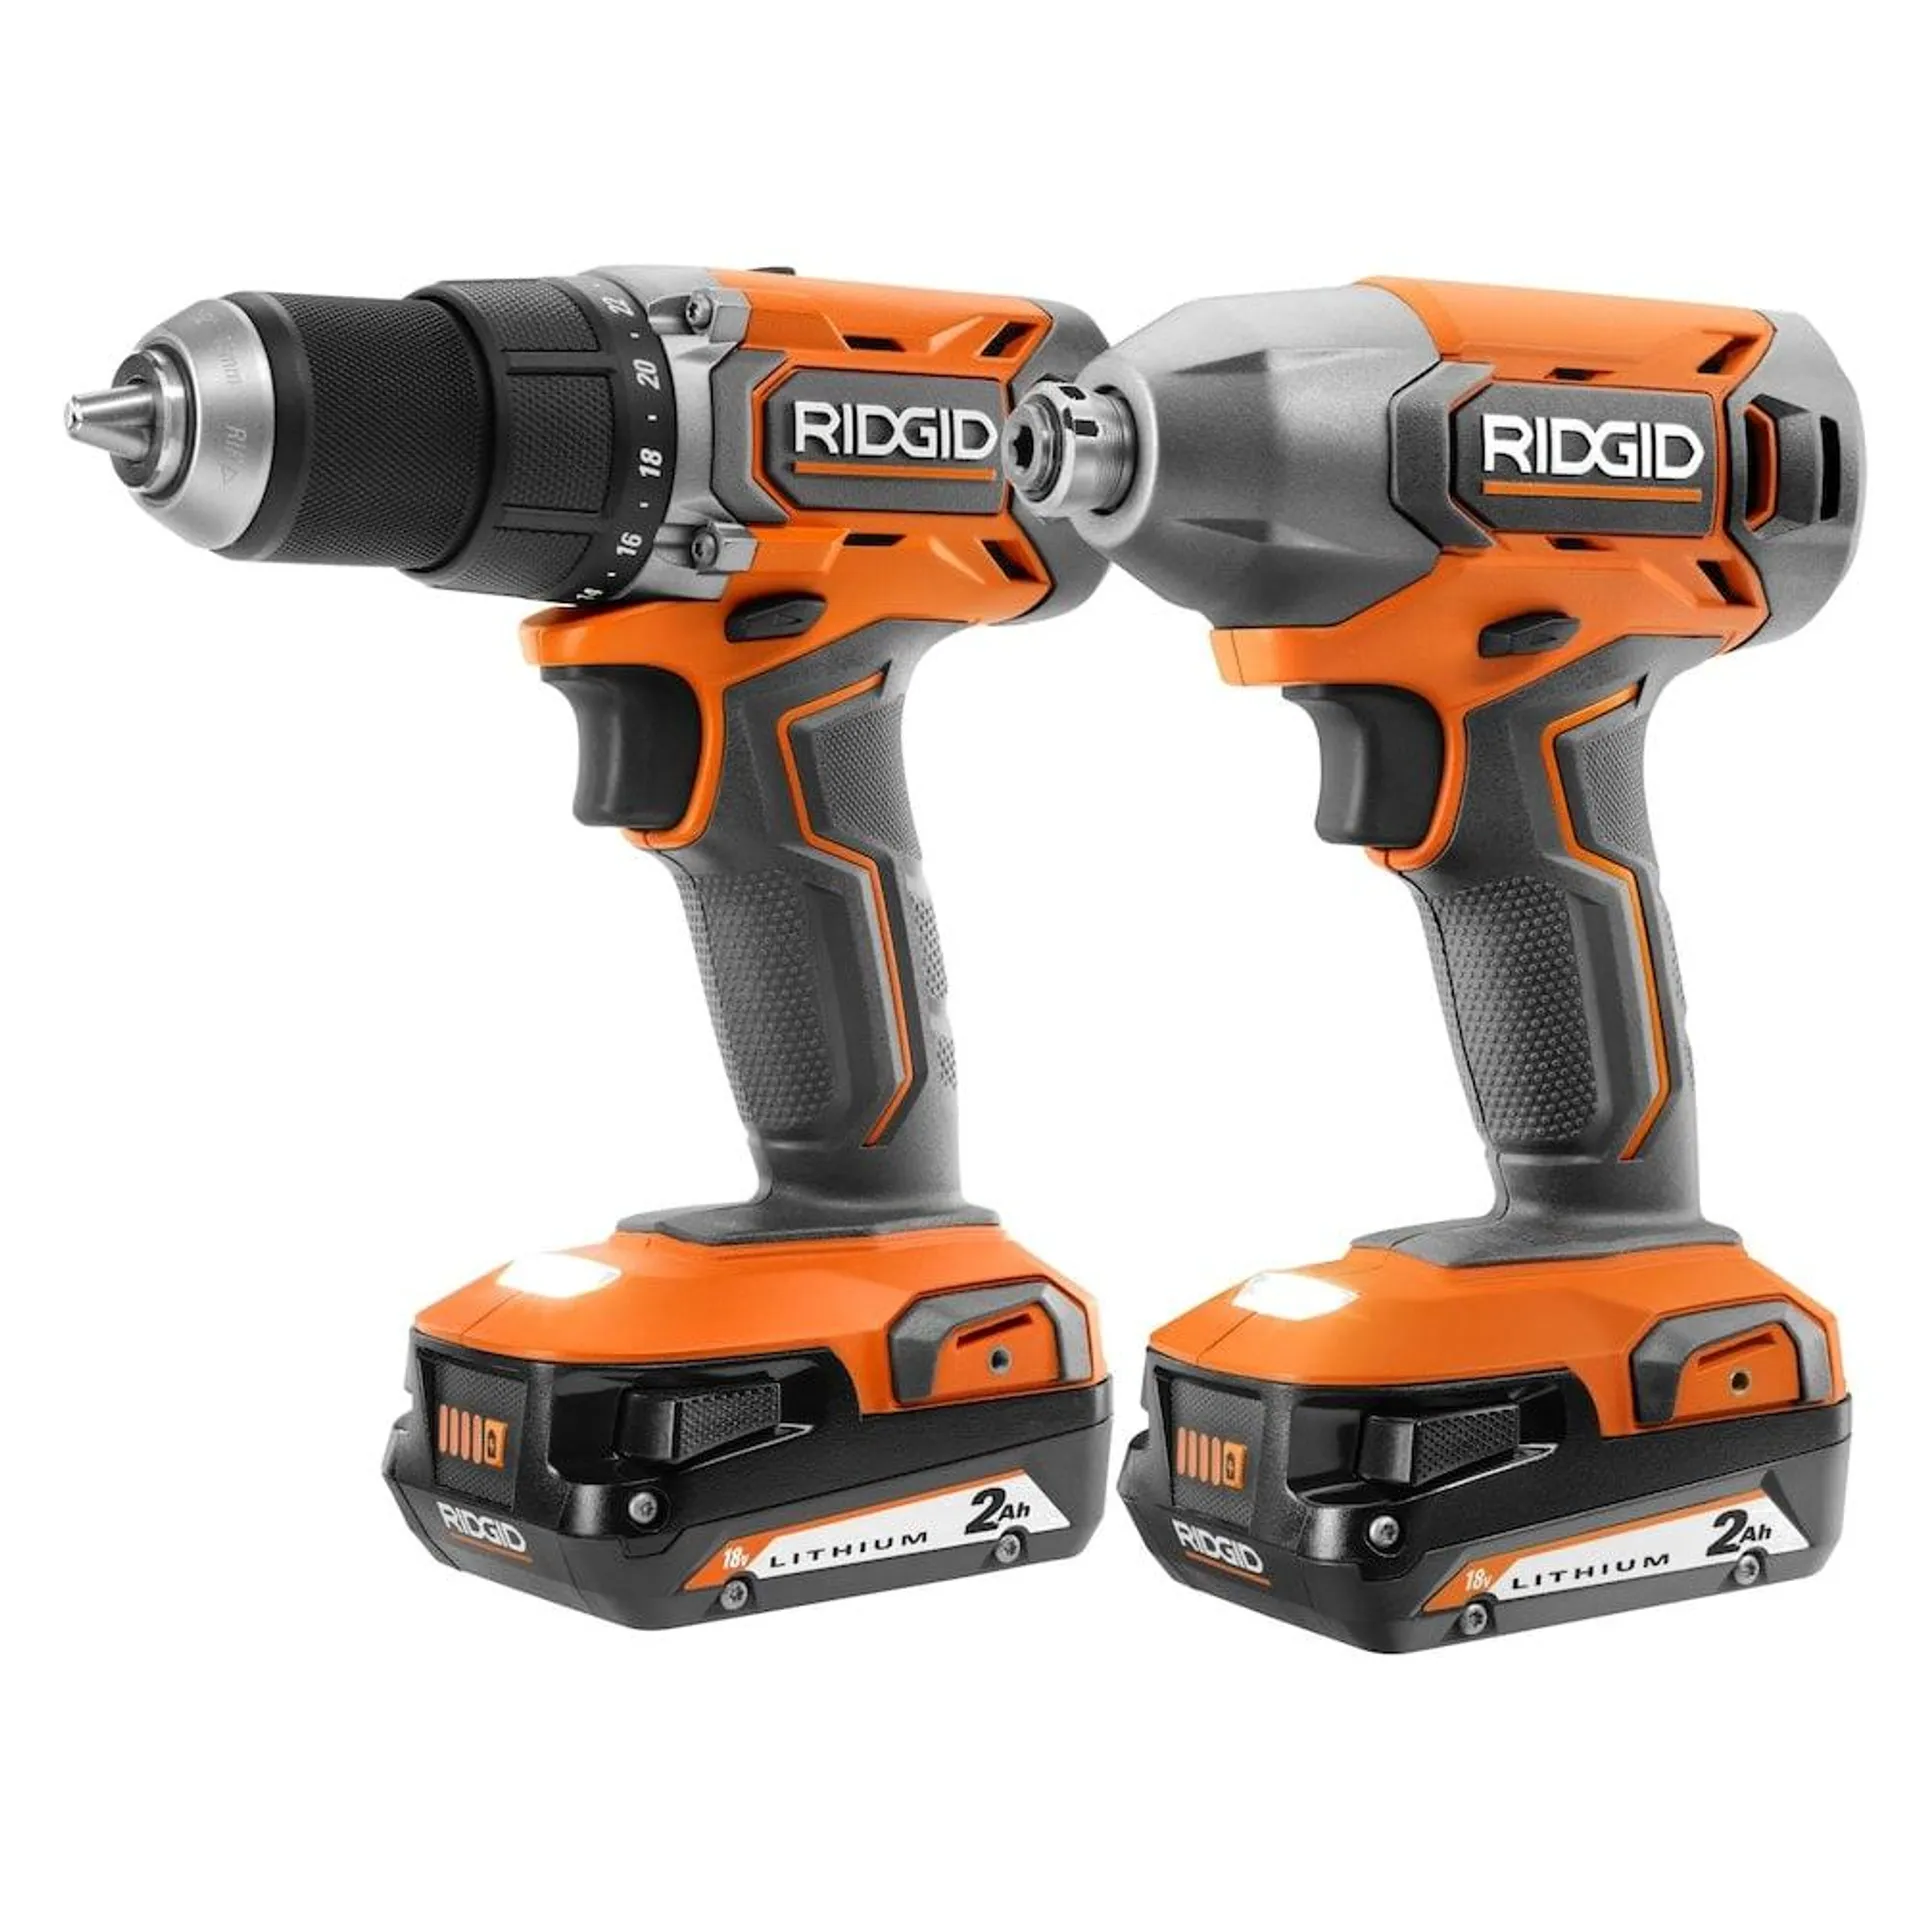 18V Drill/Driver and Impact Driver Combo Kit with (2) 2.0Ah Batteries and (1) Charger